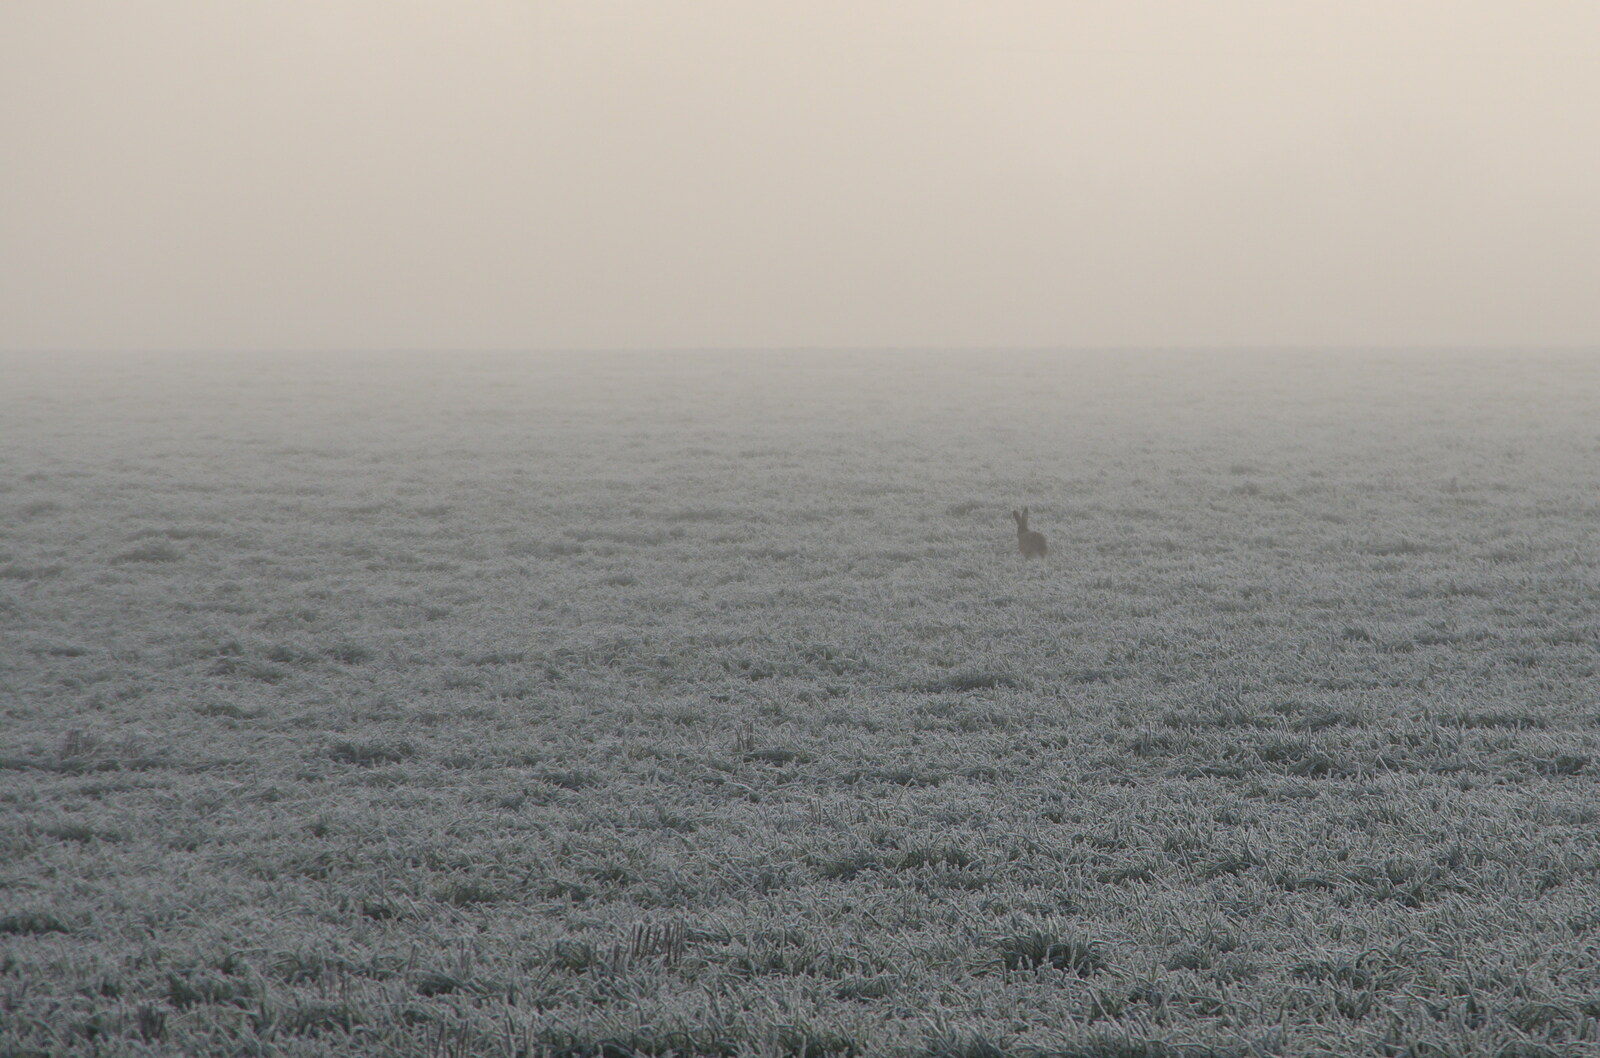 A Frosty Walk Around Brome, Suffolk - 22nd January 2023: There's a hare in a frosty field